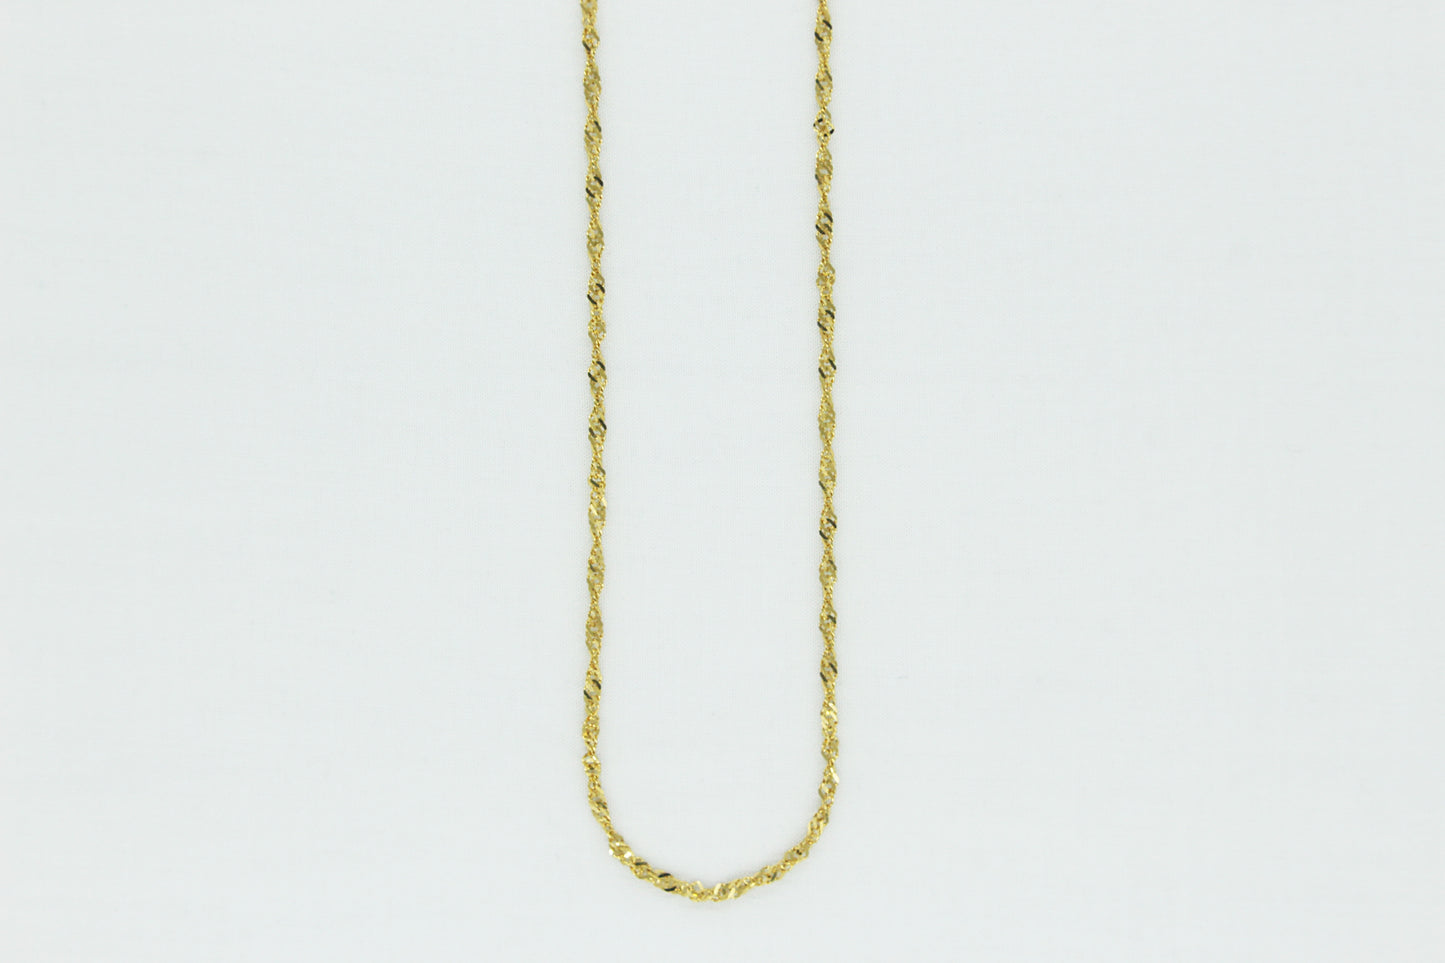 Thick Singapore Link Chain in 18K (2.5mm x 2.5mm)